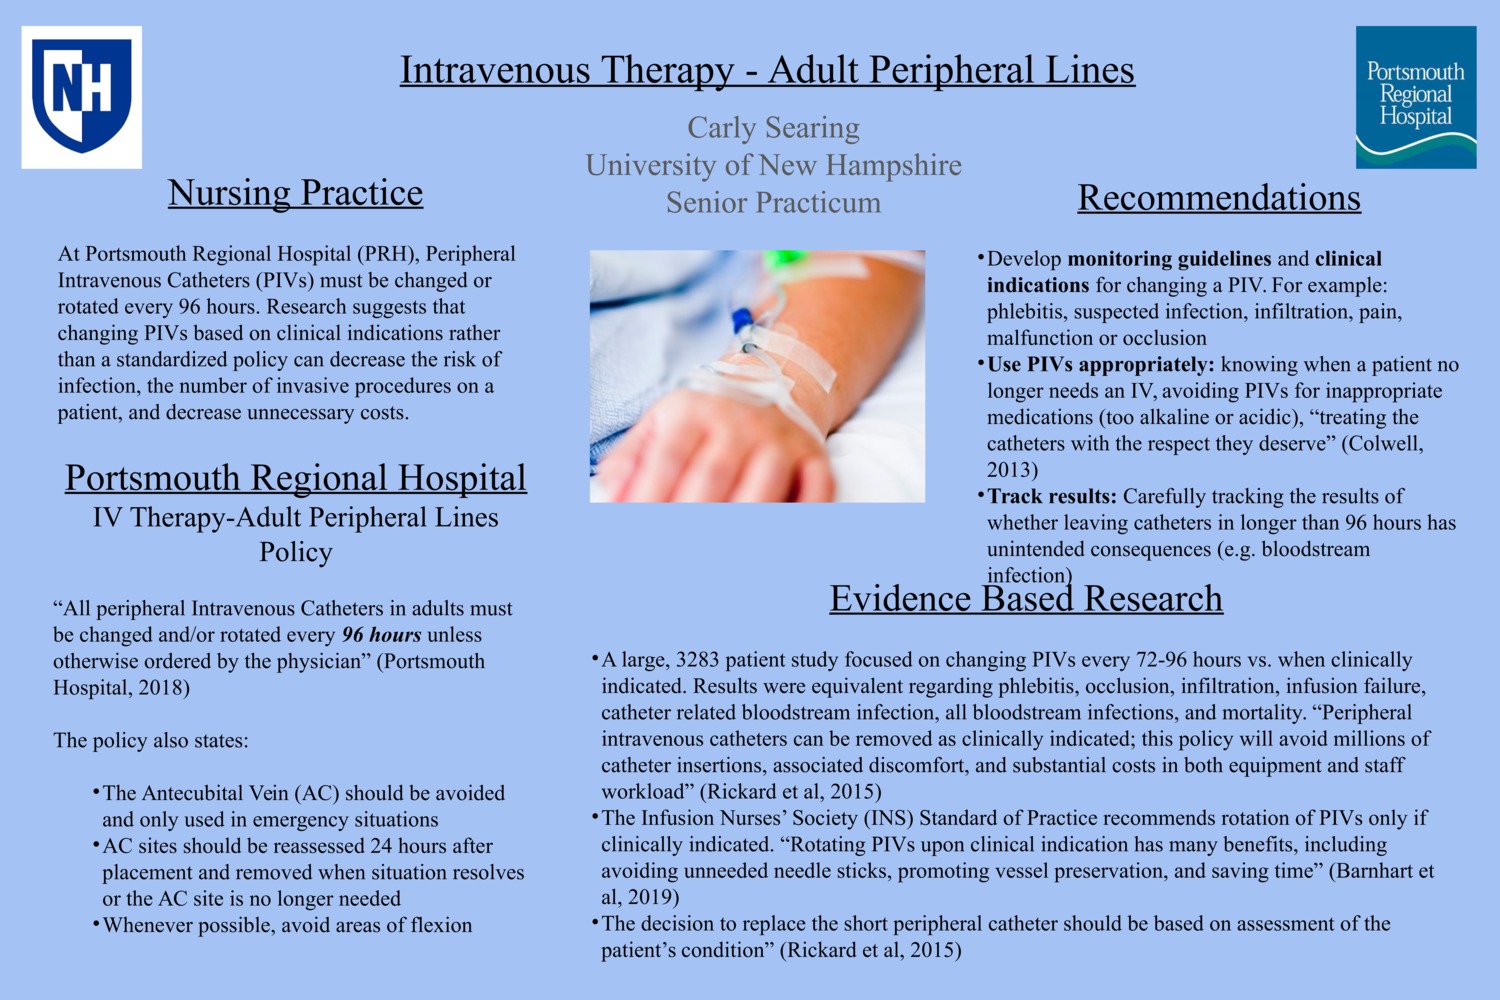 Intravenous Therapy - Adult Peripheral Lines by ces1009